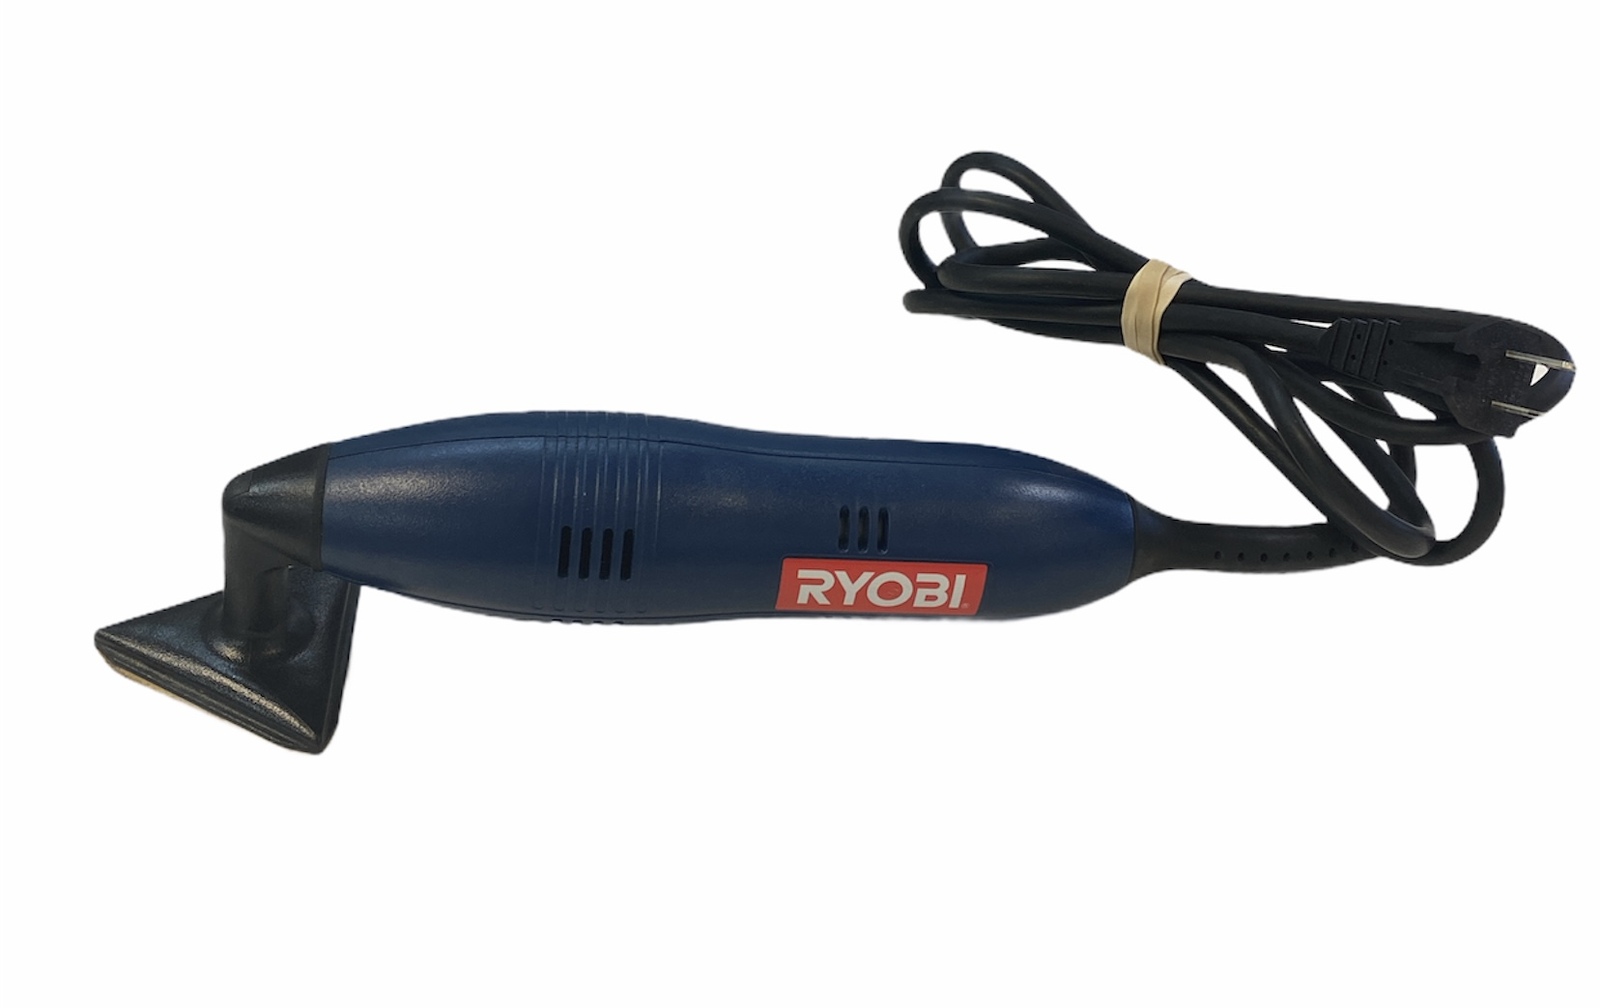 Primary image for Ryobi Corded Hand Tools Ds11008